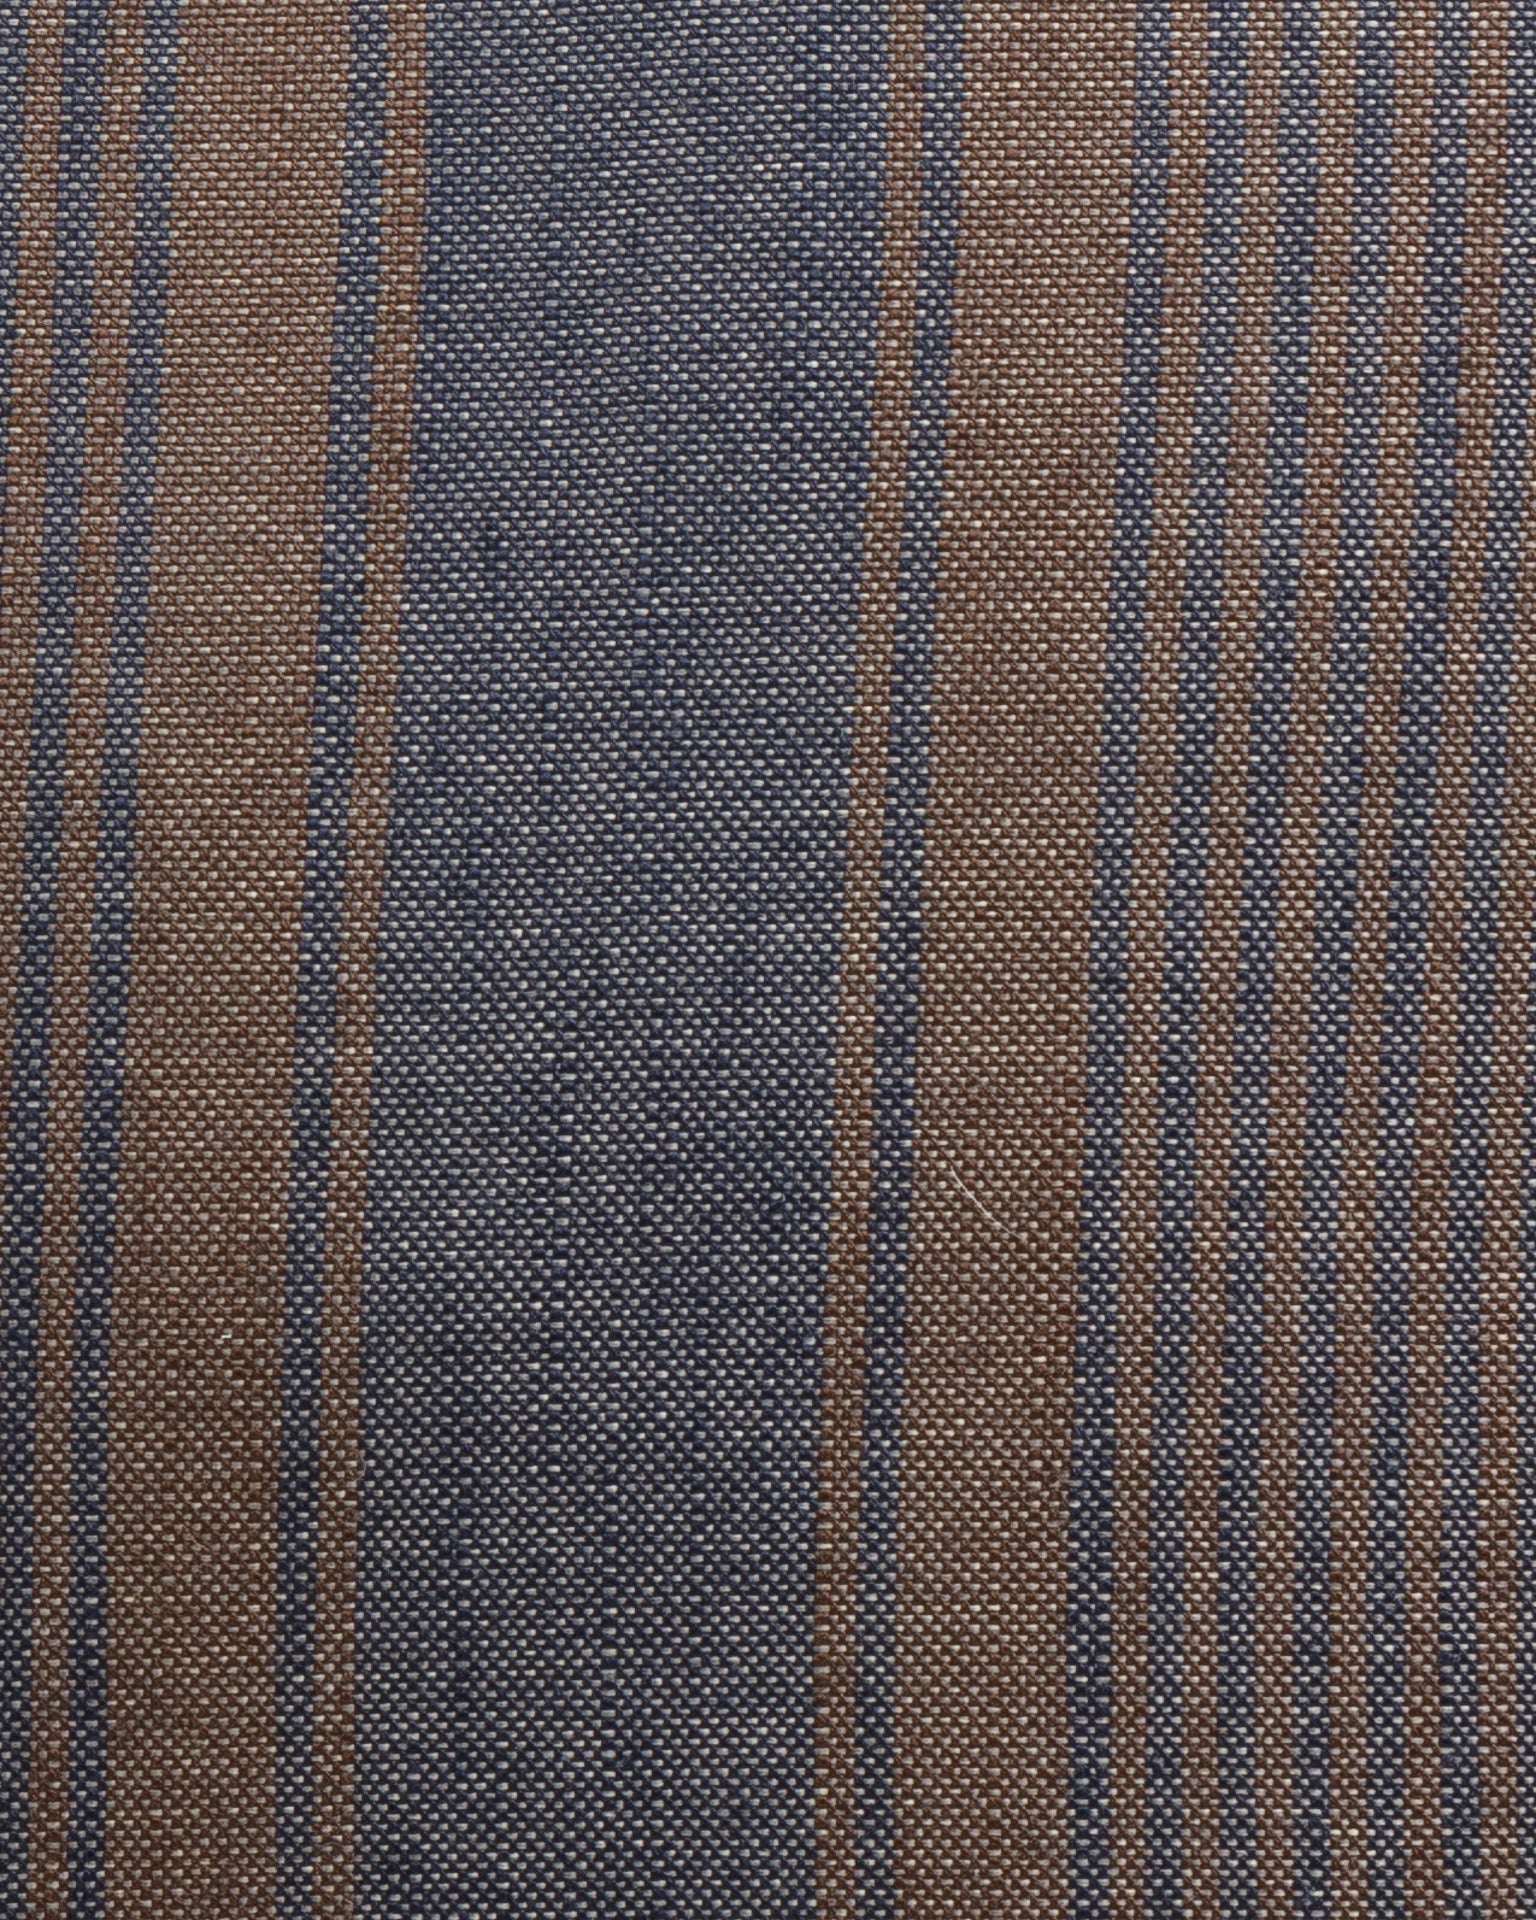 Close-up of a Casual Stripe Bark 24x24&quot; fabric with alternating brown and navy blue stripes, detailed with fine white dots on the navy sections in a Scottsdale bungalow by Gabby.